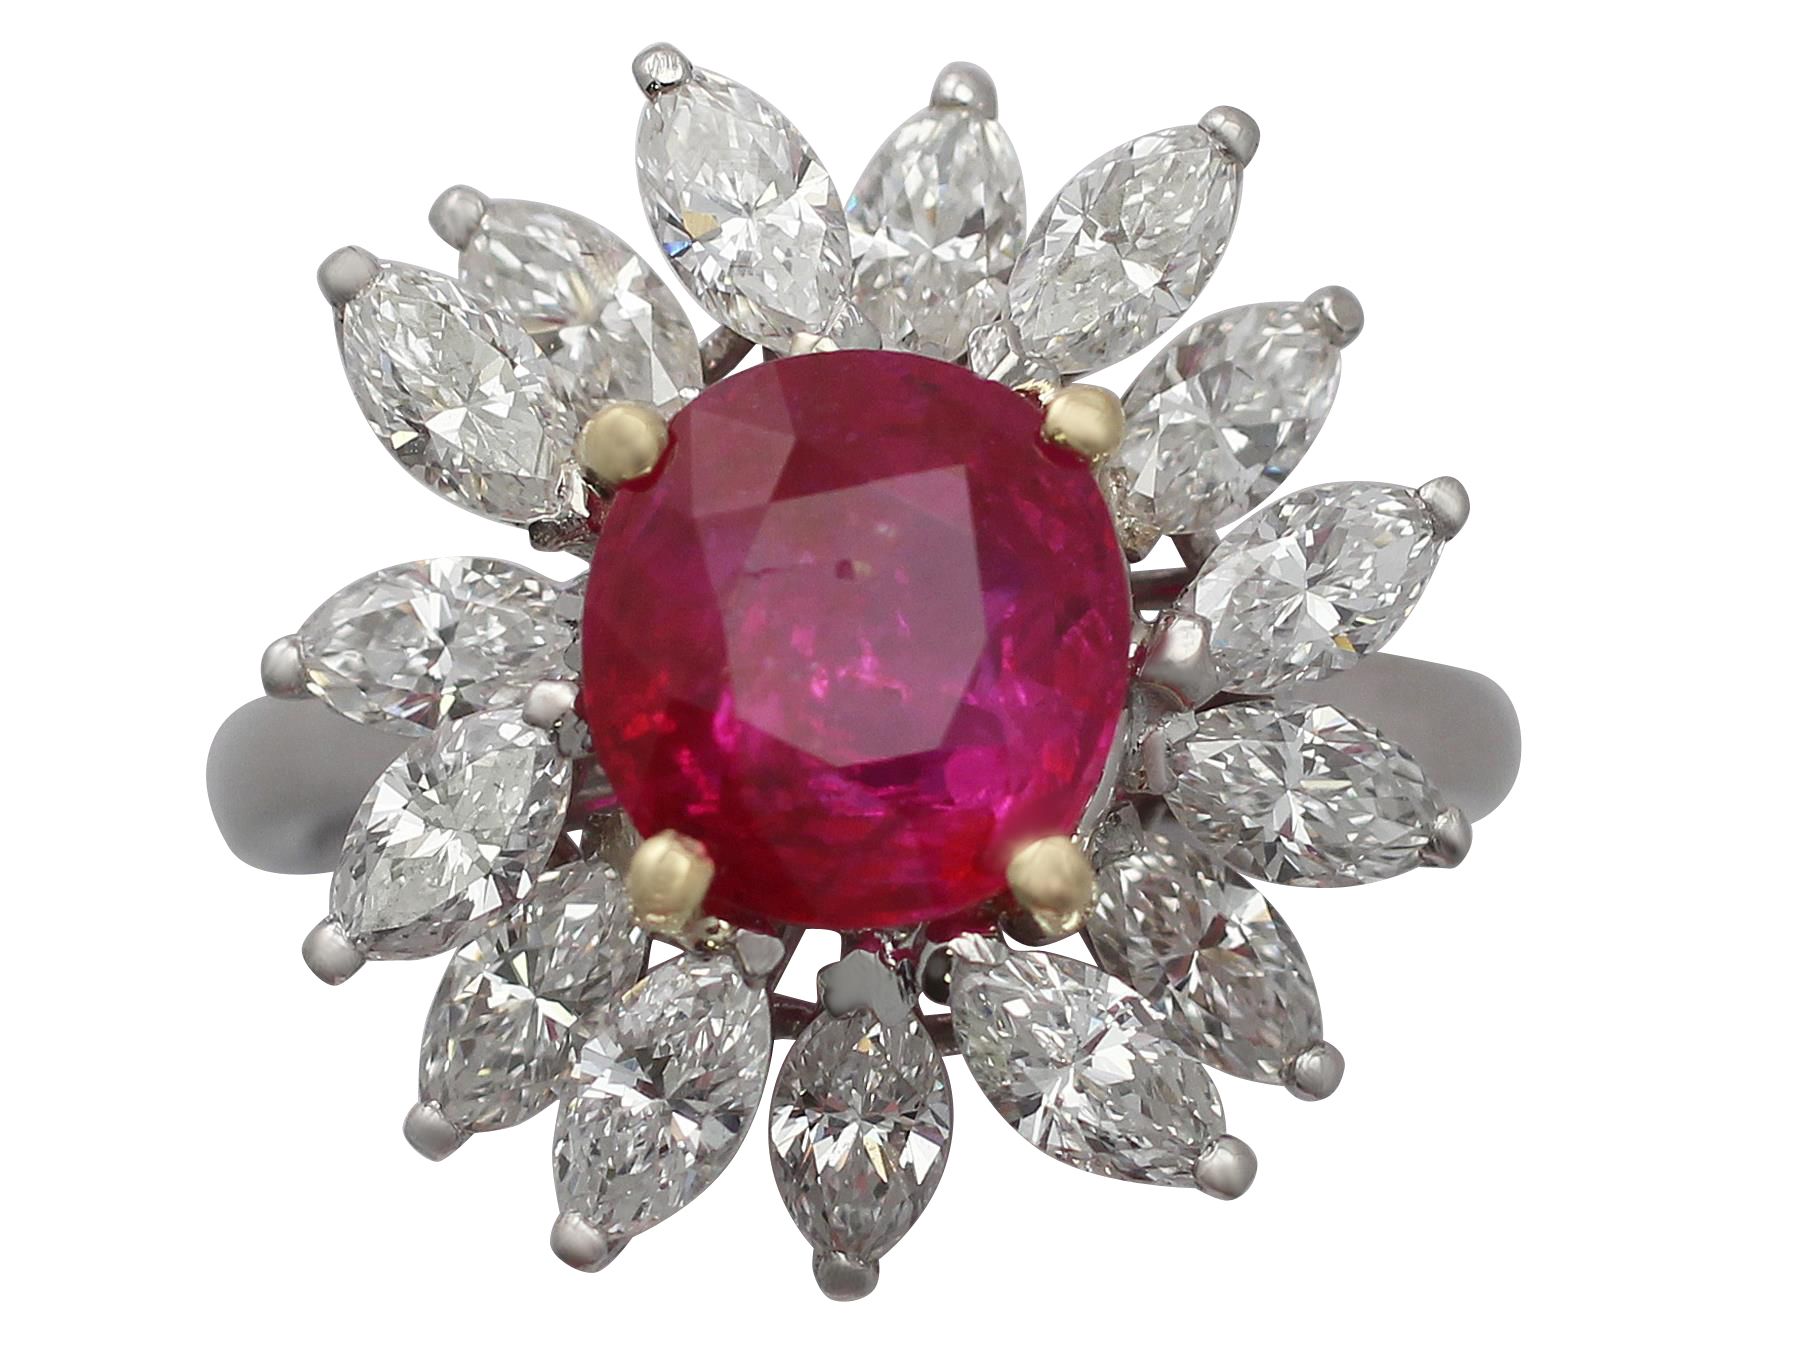 Vintage French ruby cluster ring - Cocktail Ring - Circa 1950